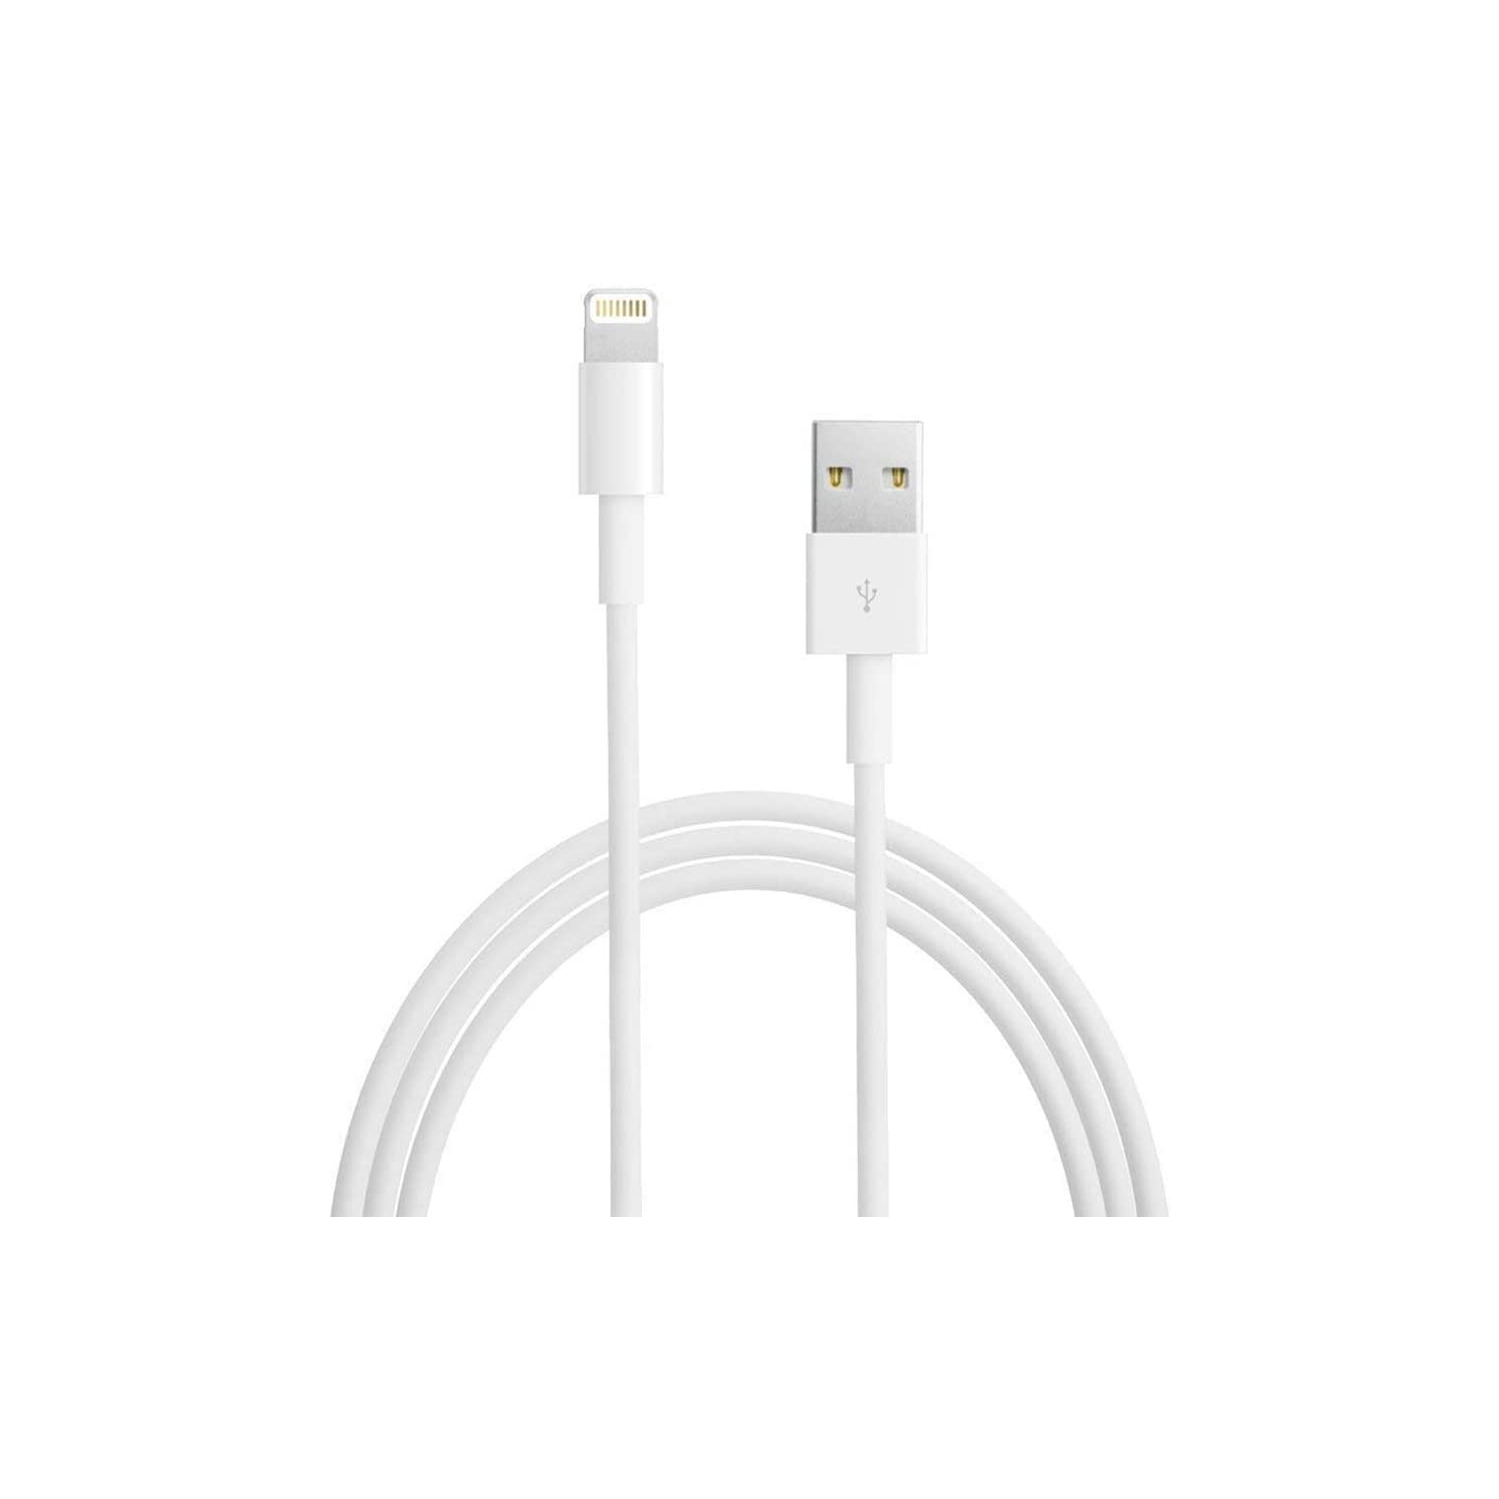 WINGOMART - [Apple MFi Certified] 3 metre/ 10ft iPhone/iPad Charging/Charger Cord Lightening to USB Cable Fast Charging and Syncing for iPads,iPods and iPhone 11/X/8/7/6s/6/plus/5s/5c/SE